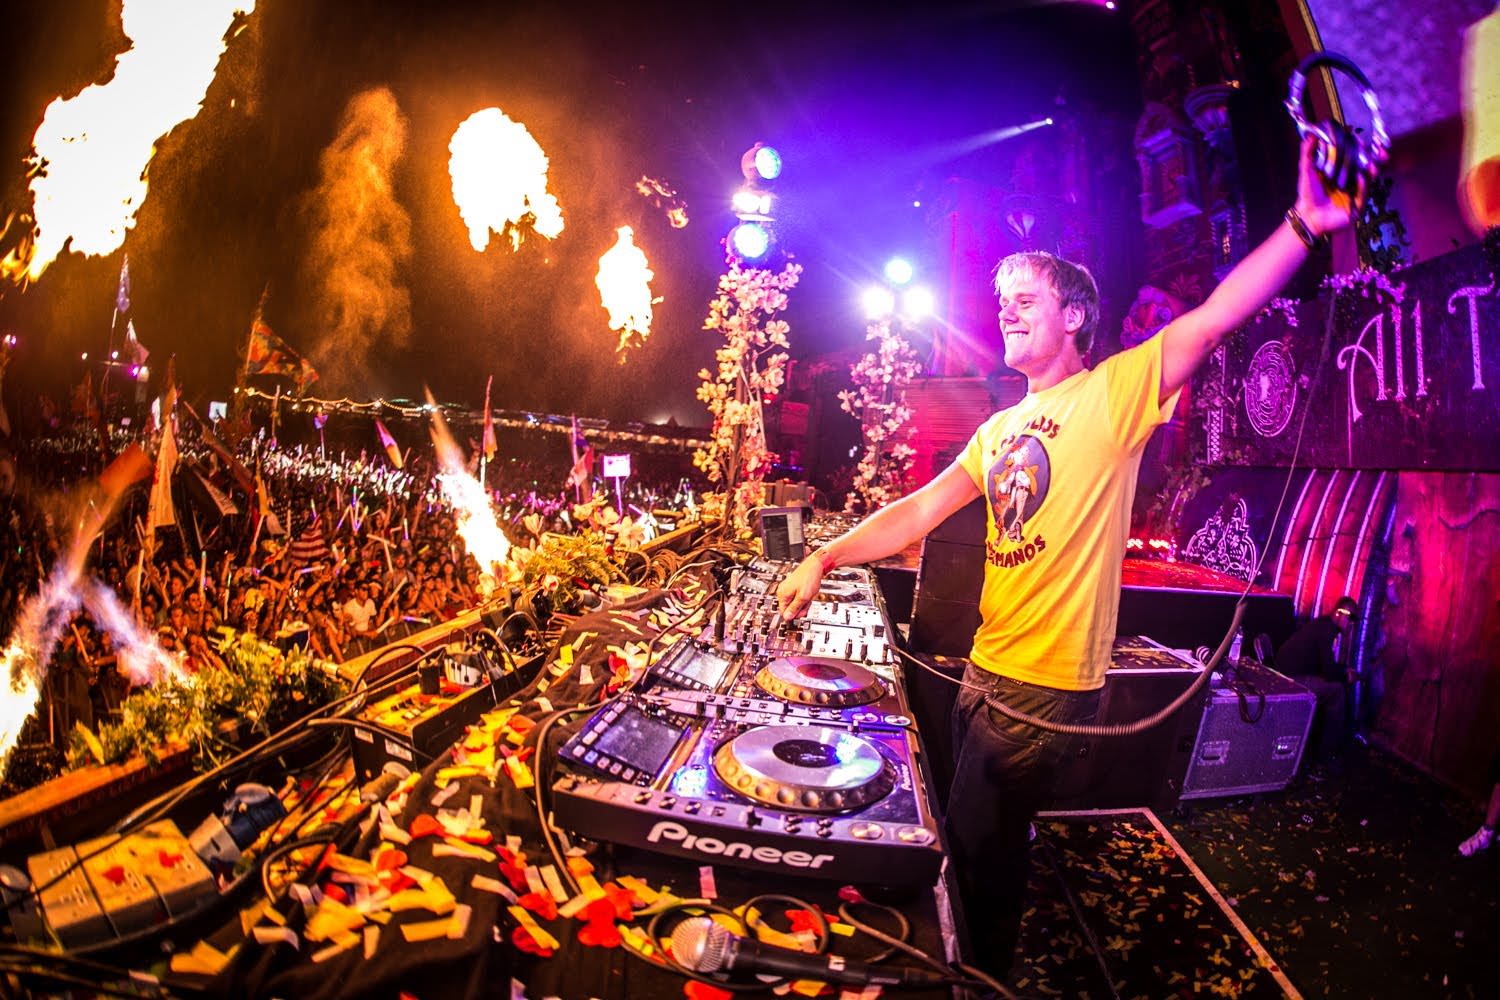 Top 12 Richest DJs in The World Ranked on The Basis of Net Worth Powws